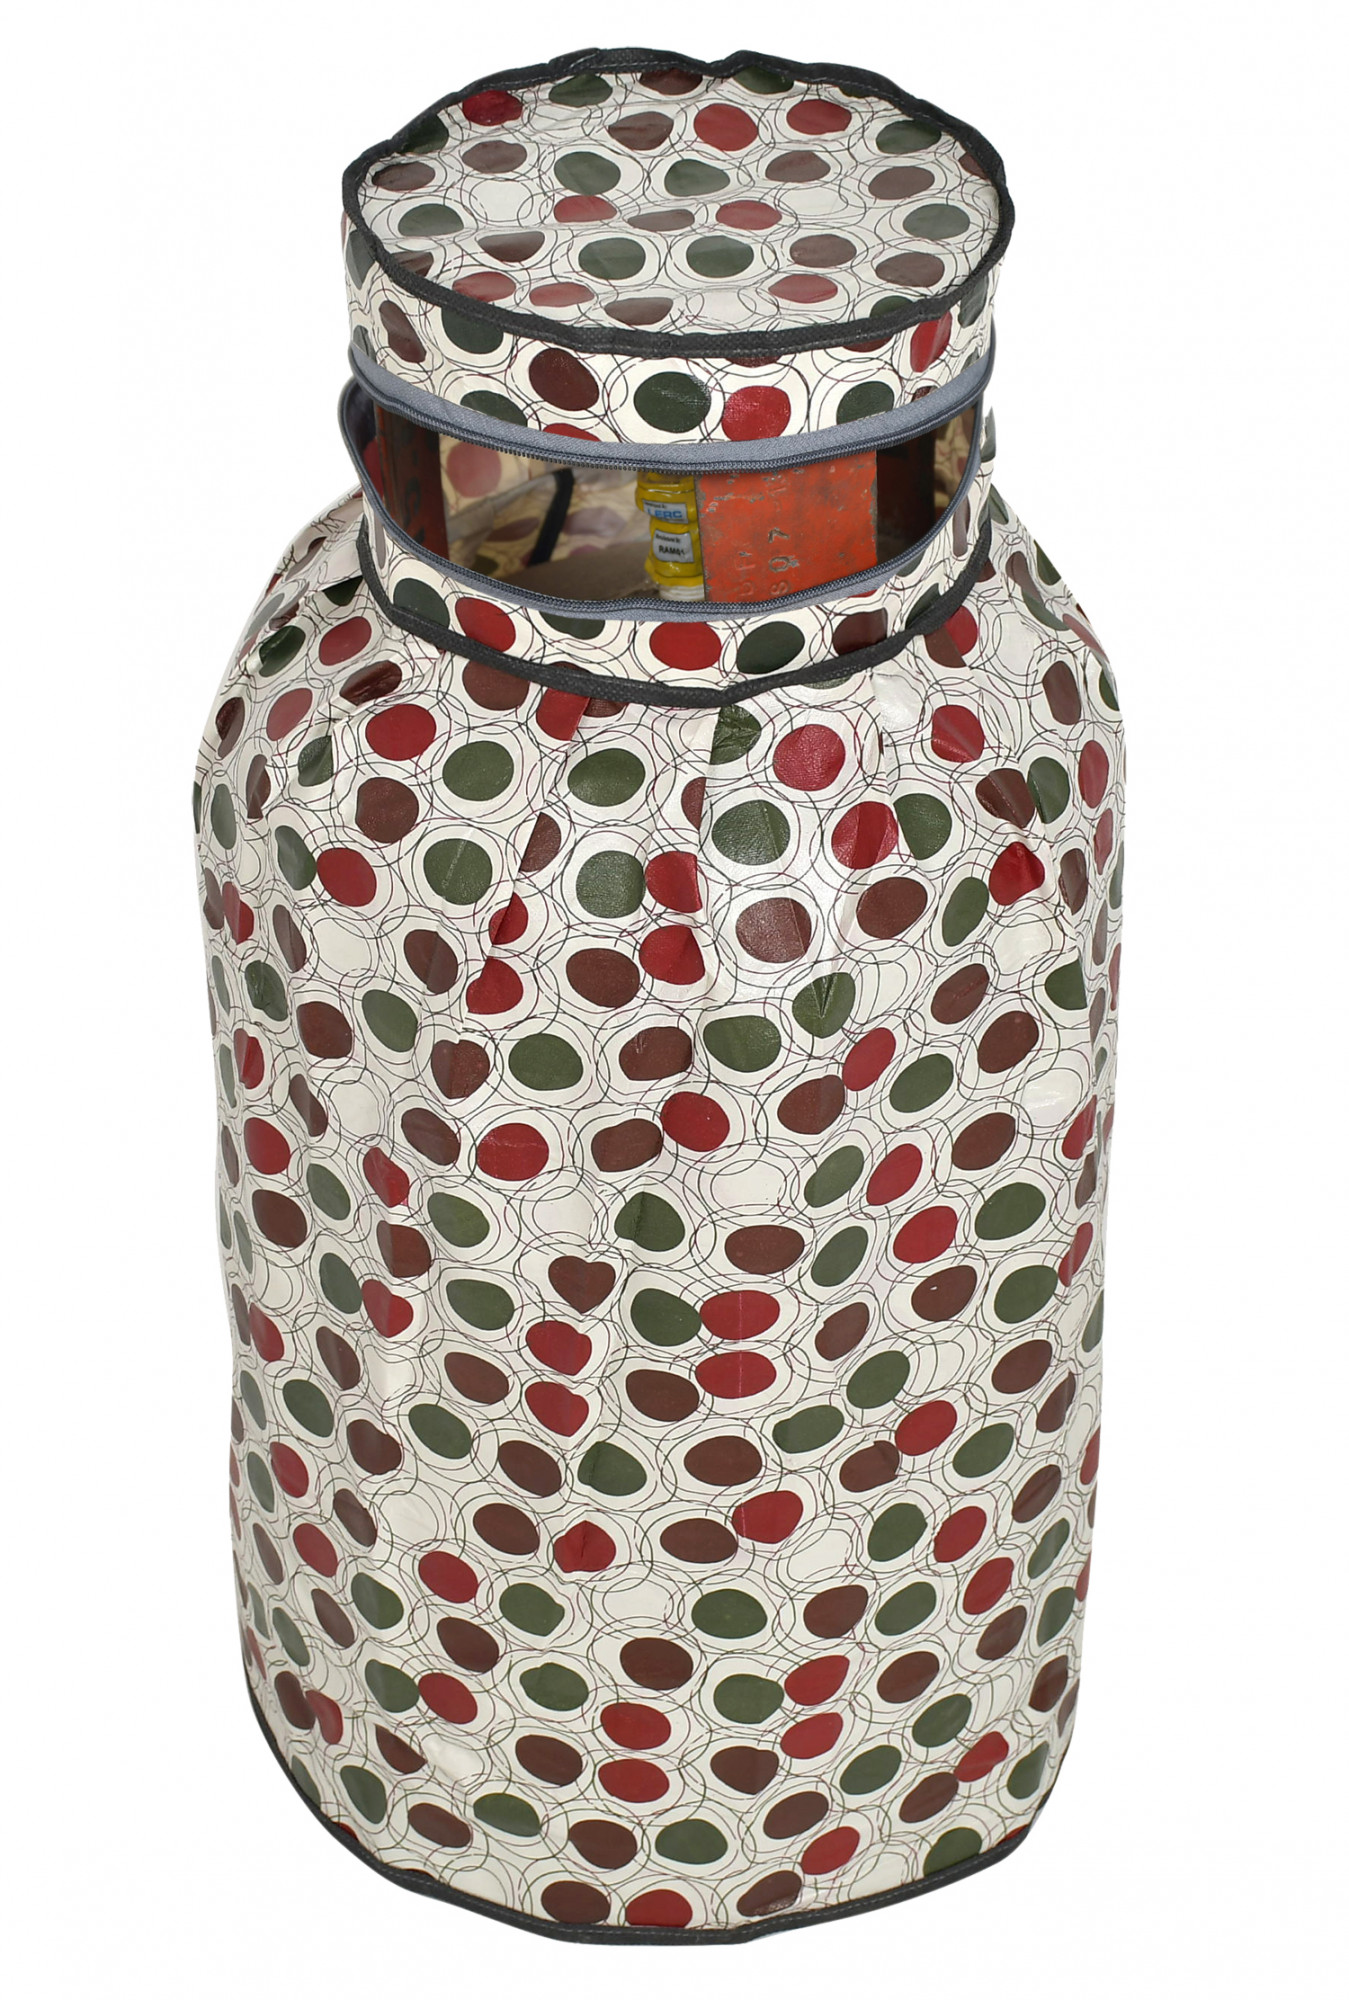 Kuber Industries Circle Design Stain/Dust/Water Proof PVC Lpg Gas Cylinder Cover (Maroon & Cream)-HS43KUBMART25614, Standard